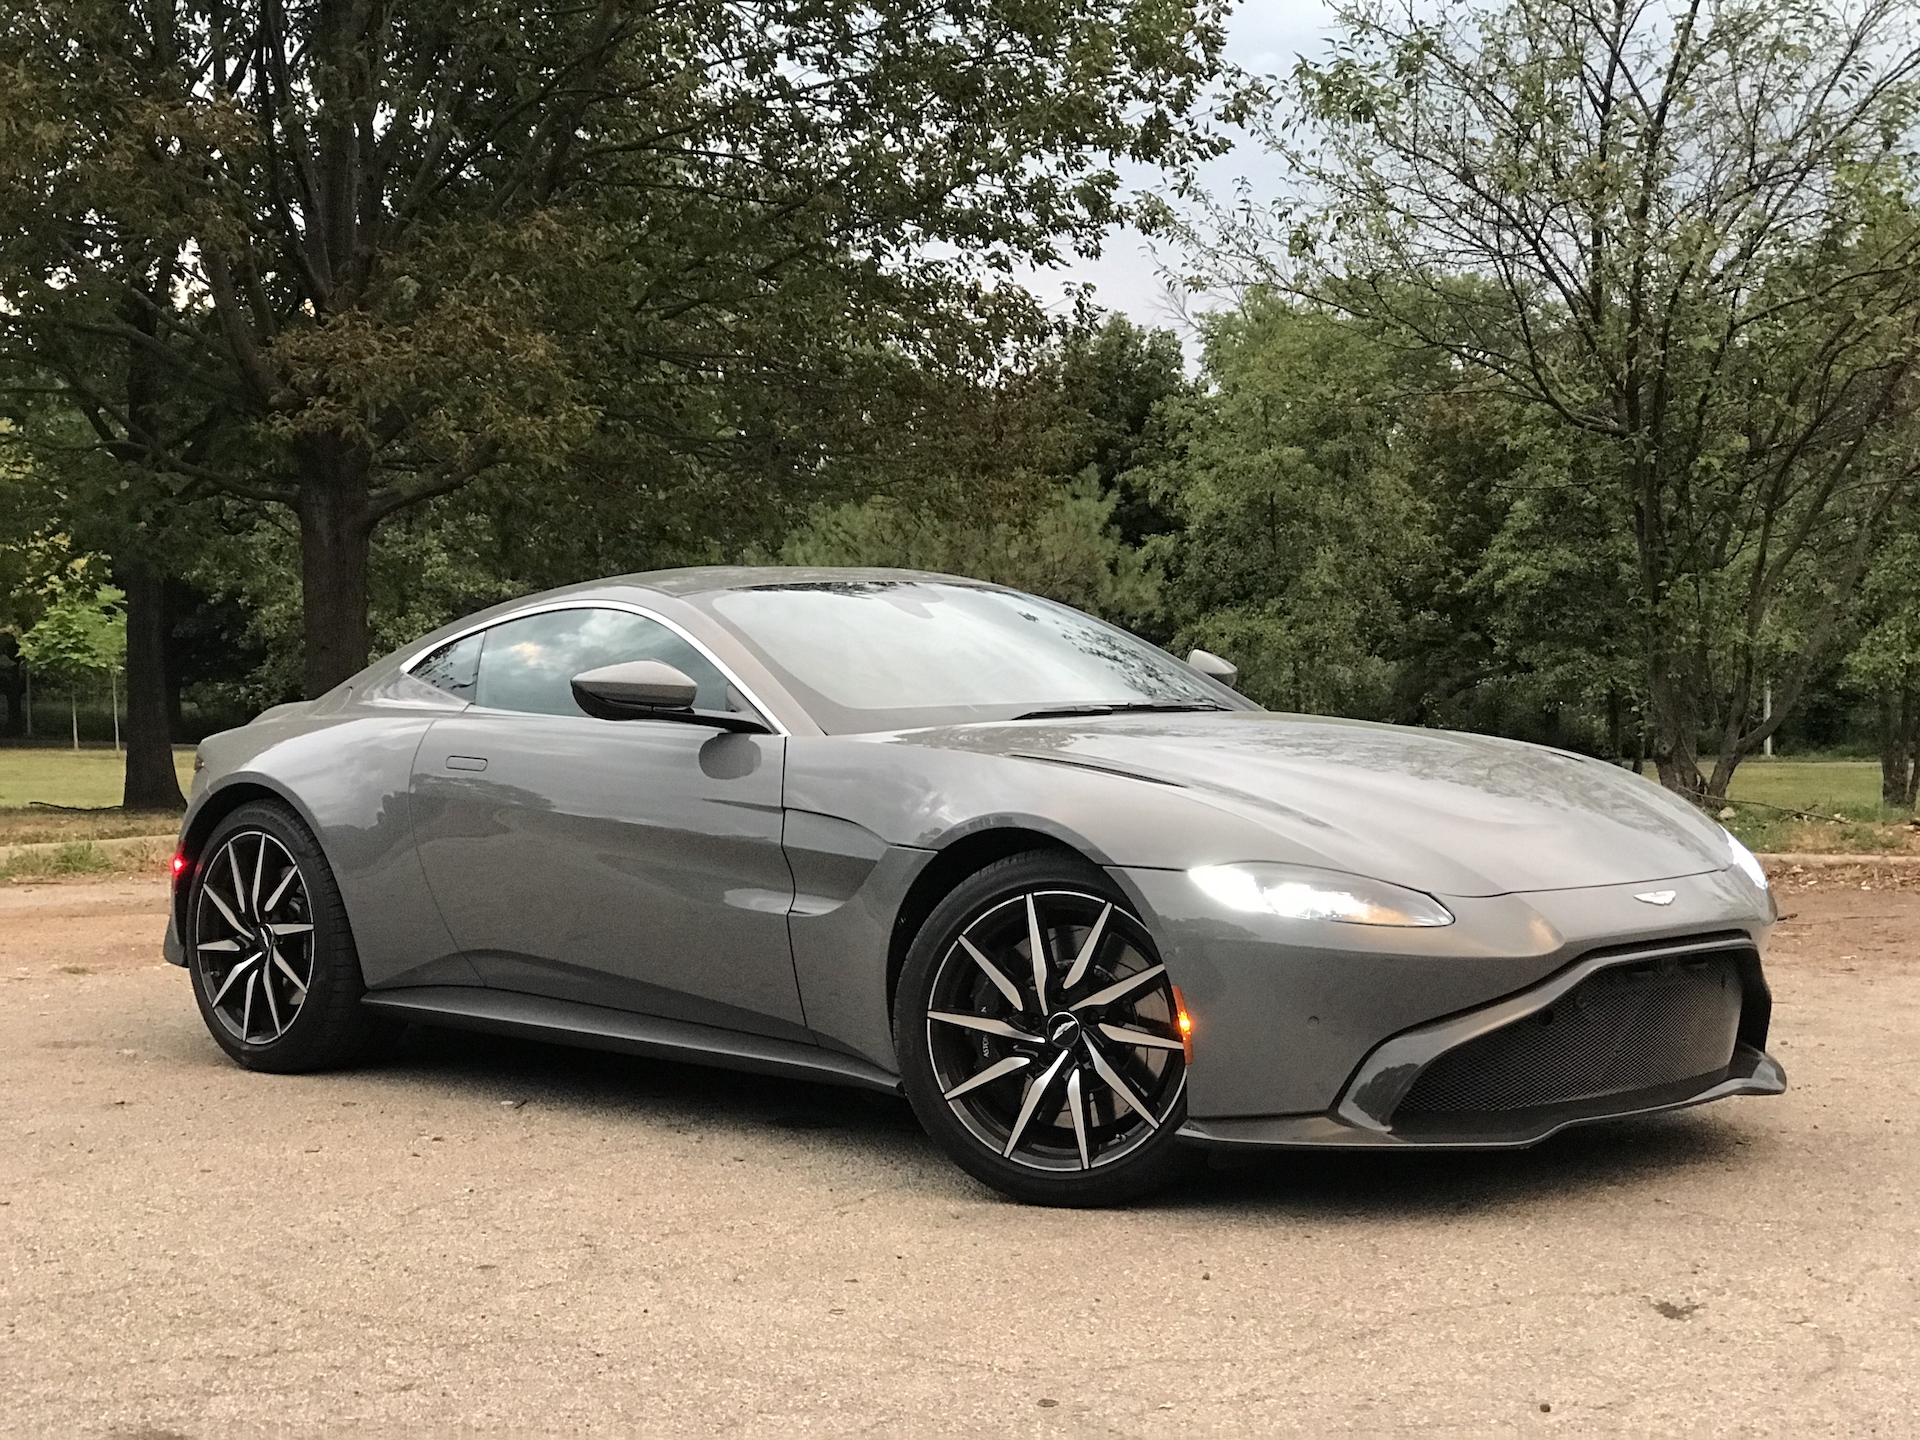 Review update: 2020 Aston Martin Vantage appeals as dashing and different